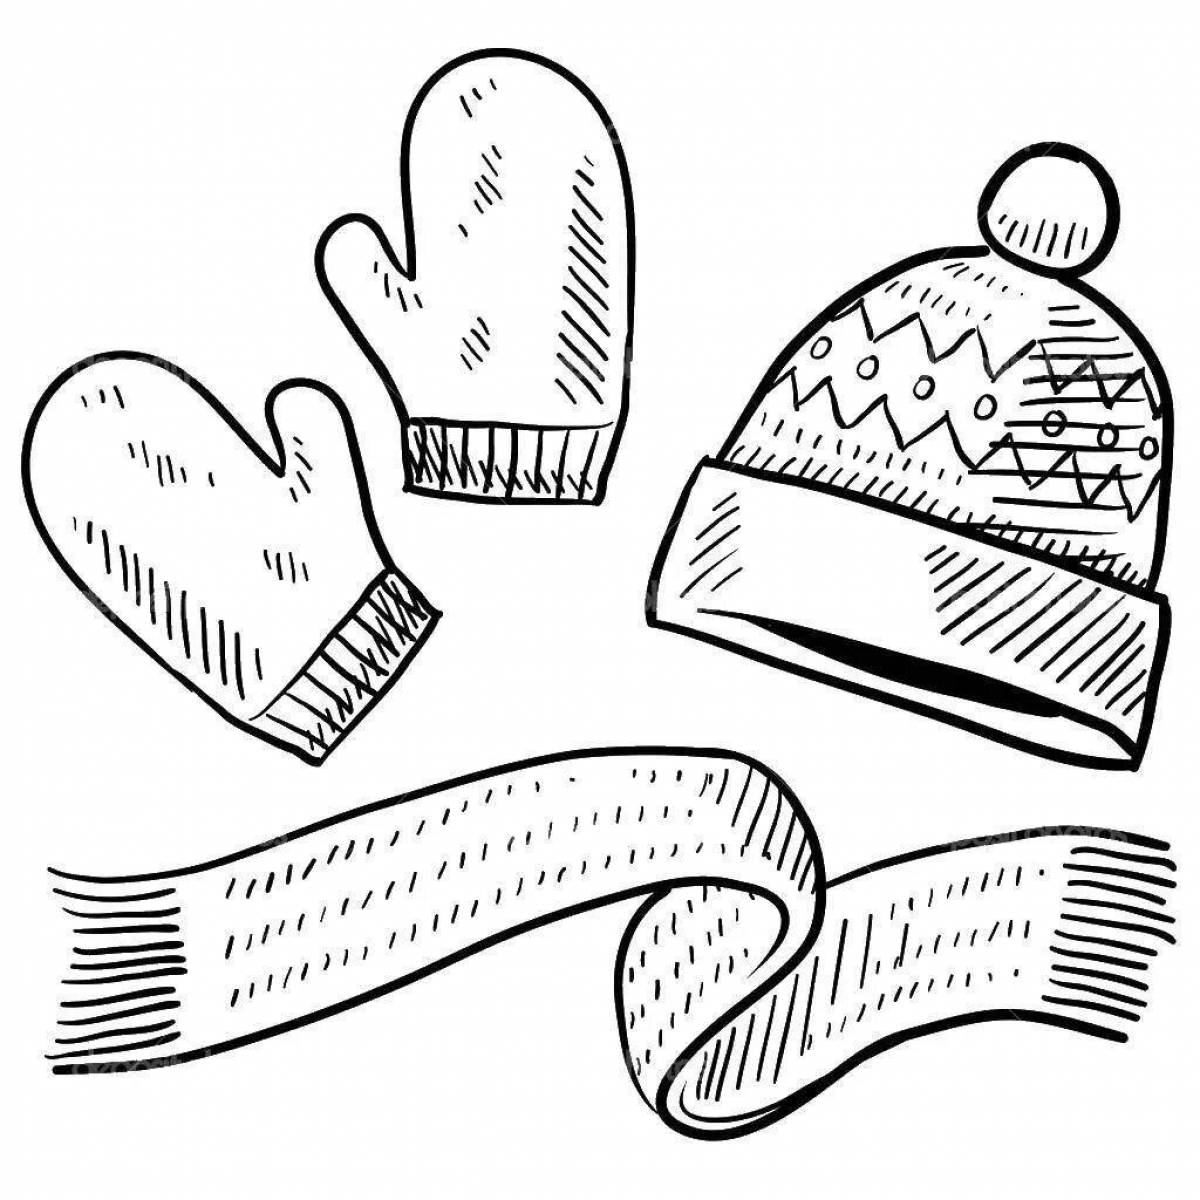 Hat and mittens #1